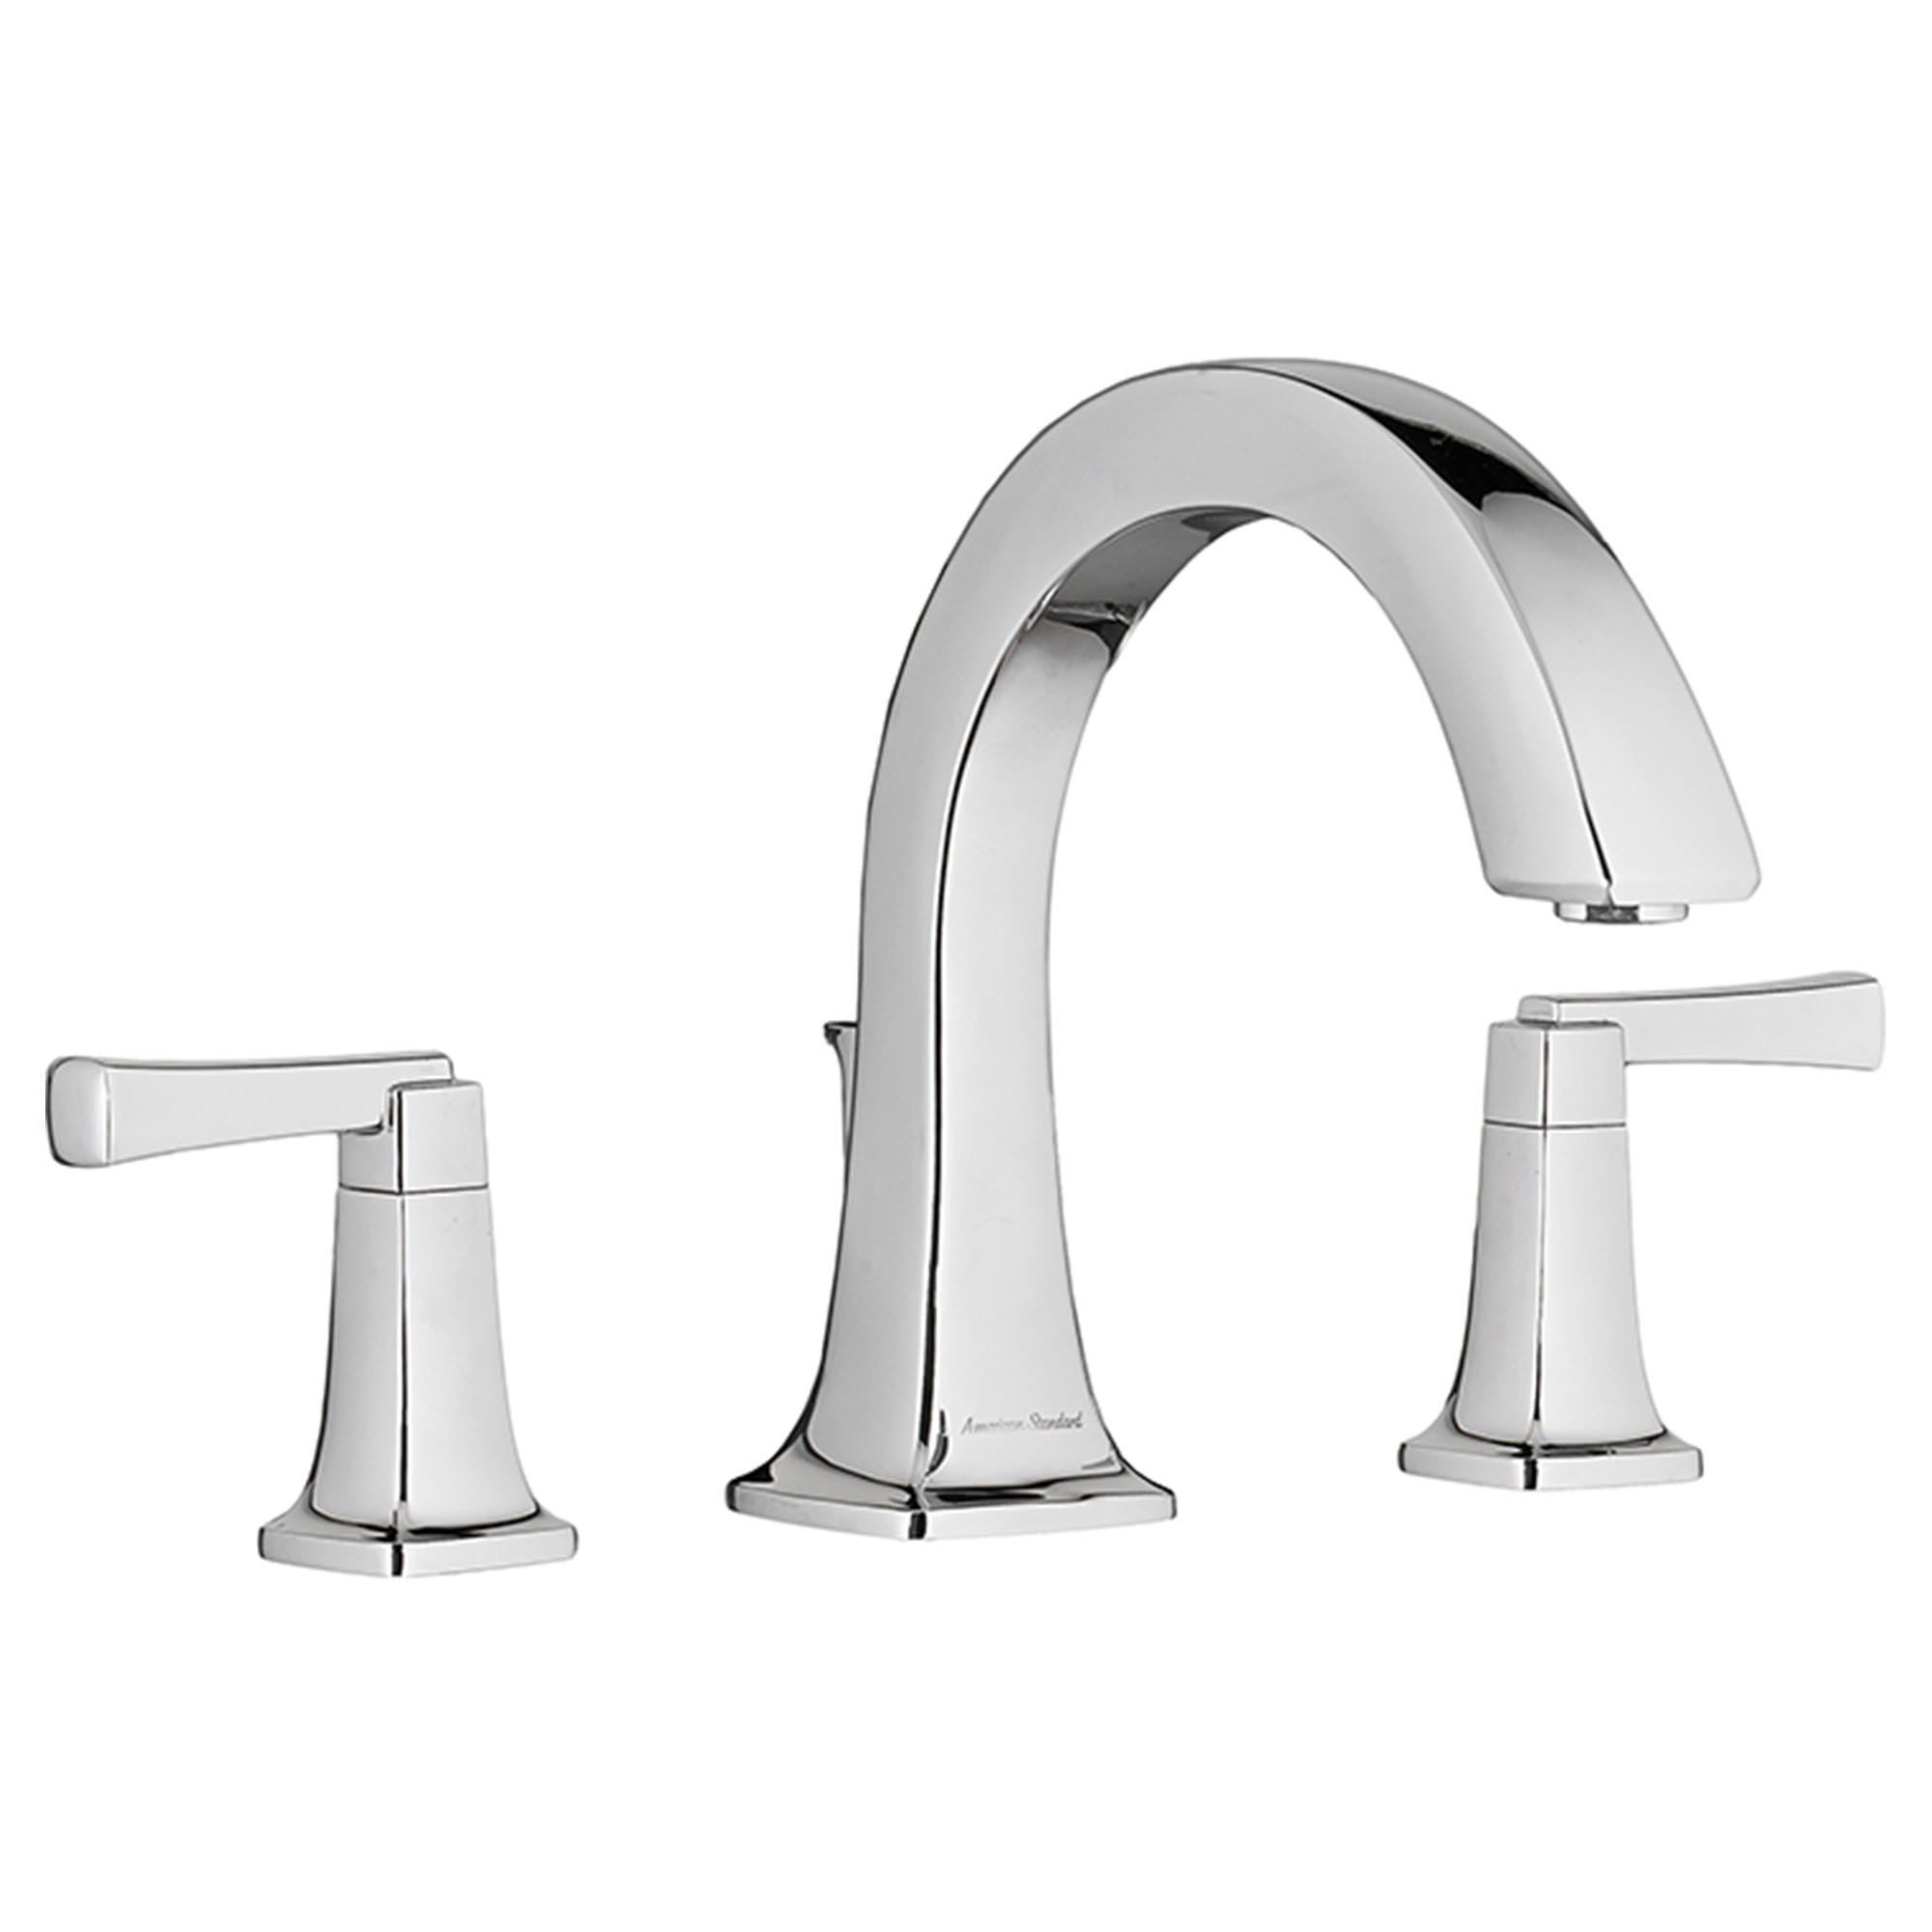 Townsend Bathtub Faucet With Lever Handles for Flash Rough In Valve CHROME